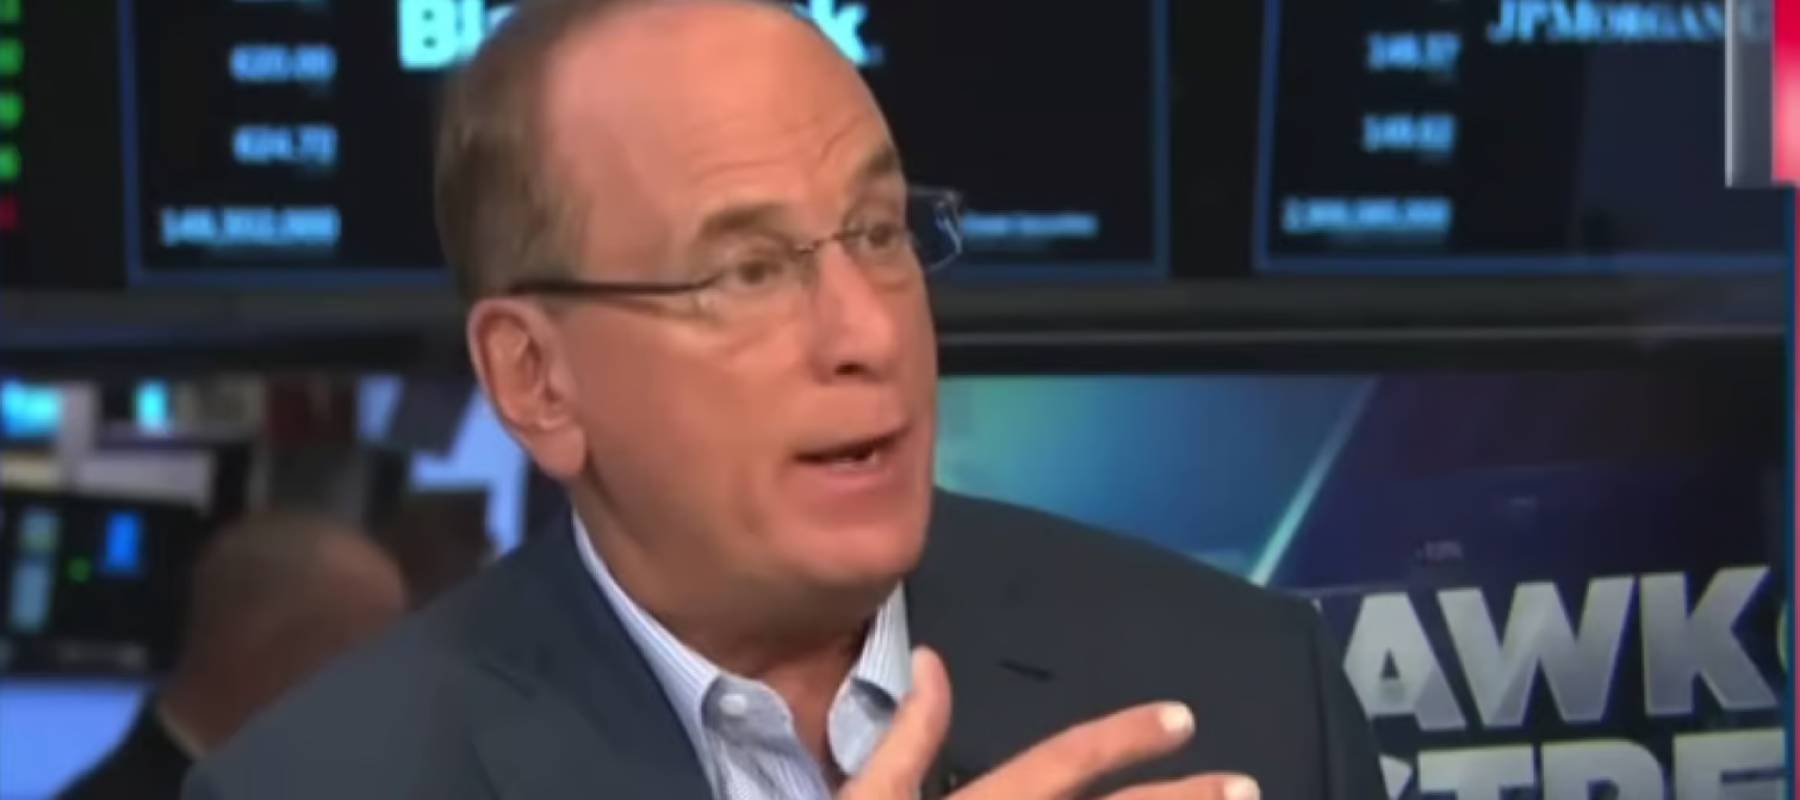 Blackrock CEO Larry Fink speaking with his hands held up, looking to the right of the picture